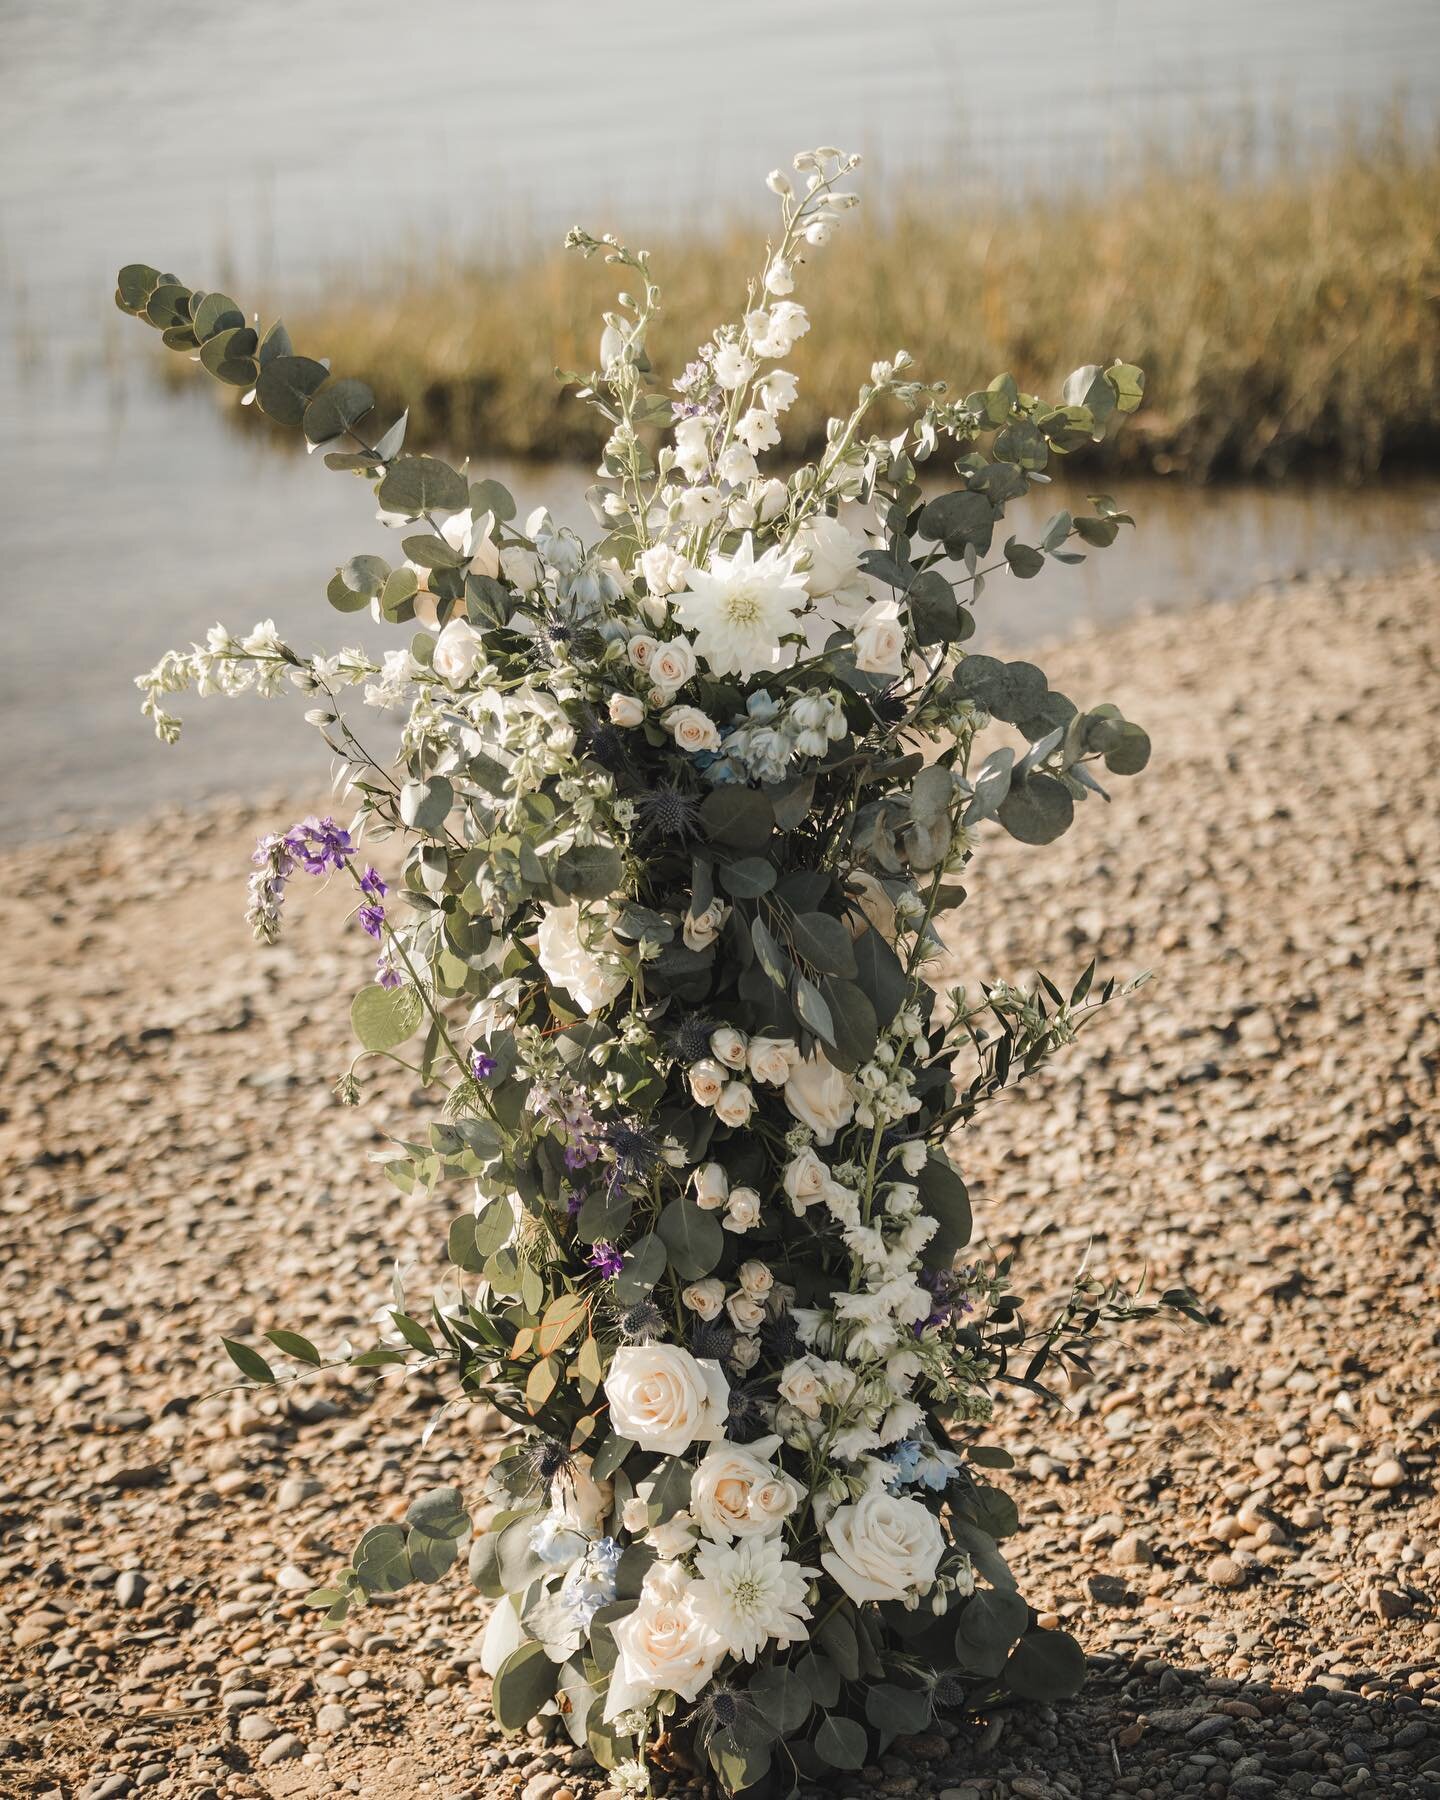 Ceremony floral details from my brother&rsquo;s beach wedding in the marshes of Marshfield 🌊 swipe to see the full setup and the lovely couple 🥰. Shoutout to the best helpers - couldn&rsquo;t have pulled off doing the flowers and being a bridesmaid